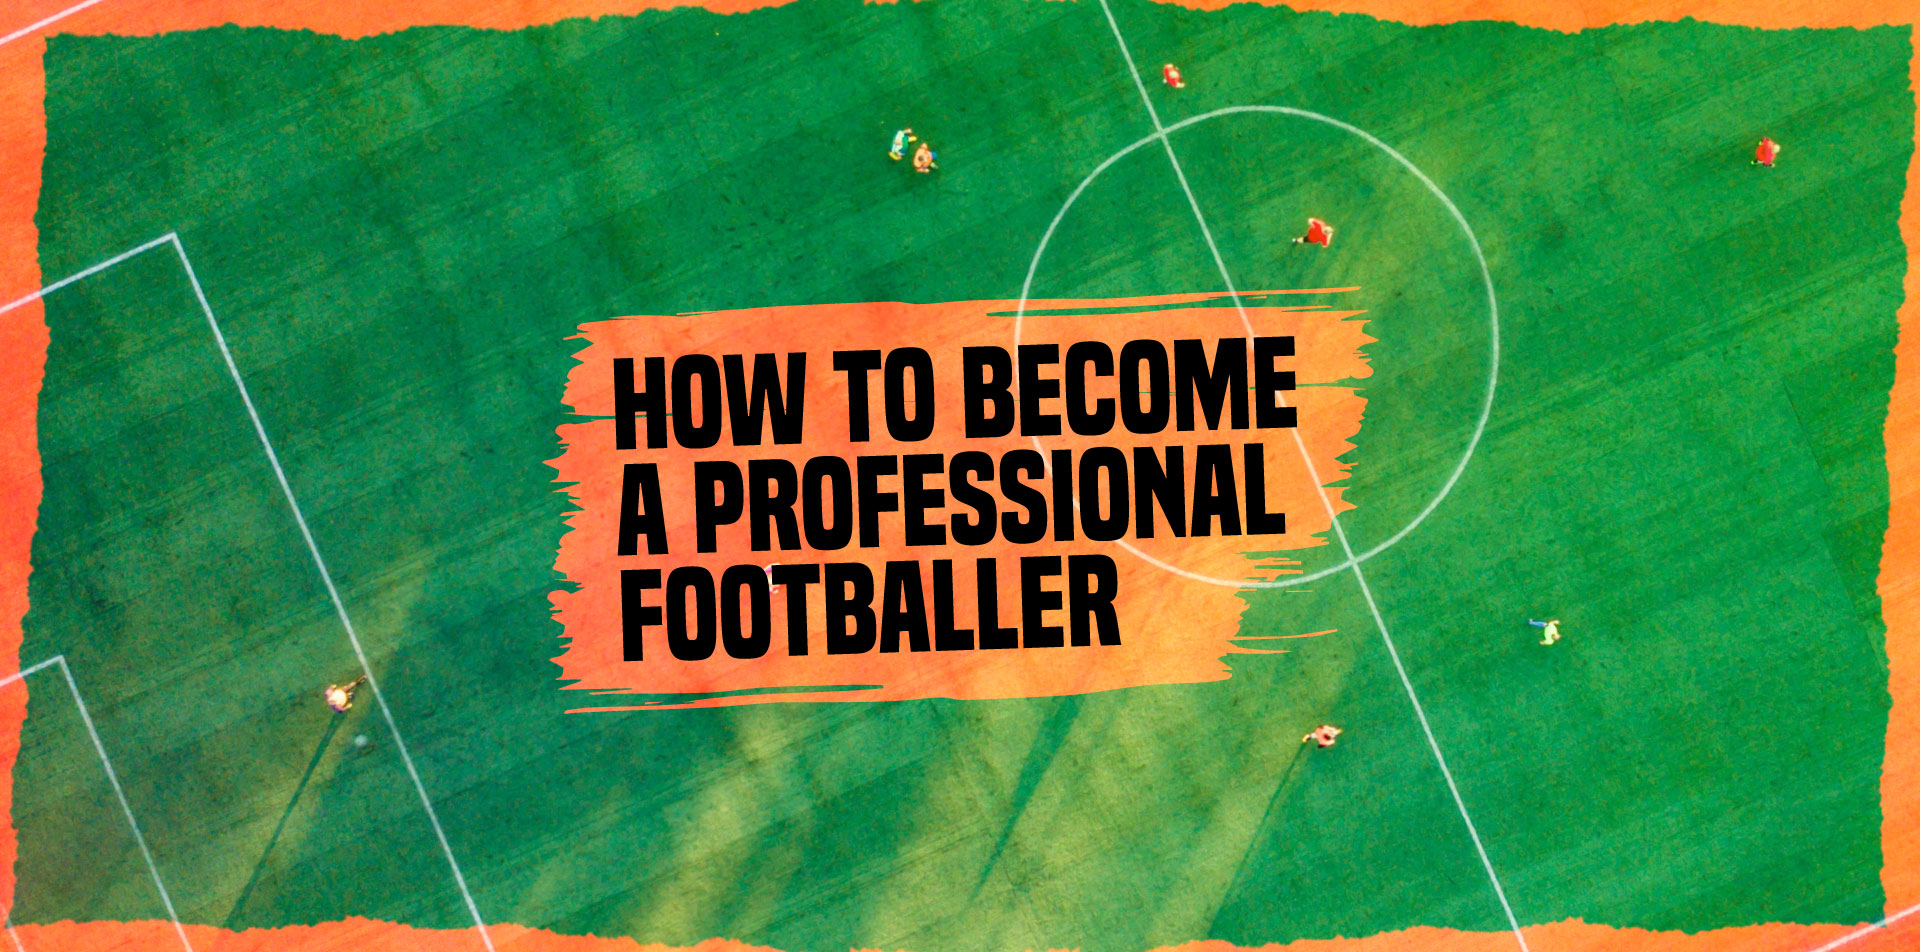 ⚠️5 WAYS TO BECOME A PROFESSIONAL FOOTBALL PLAYER